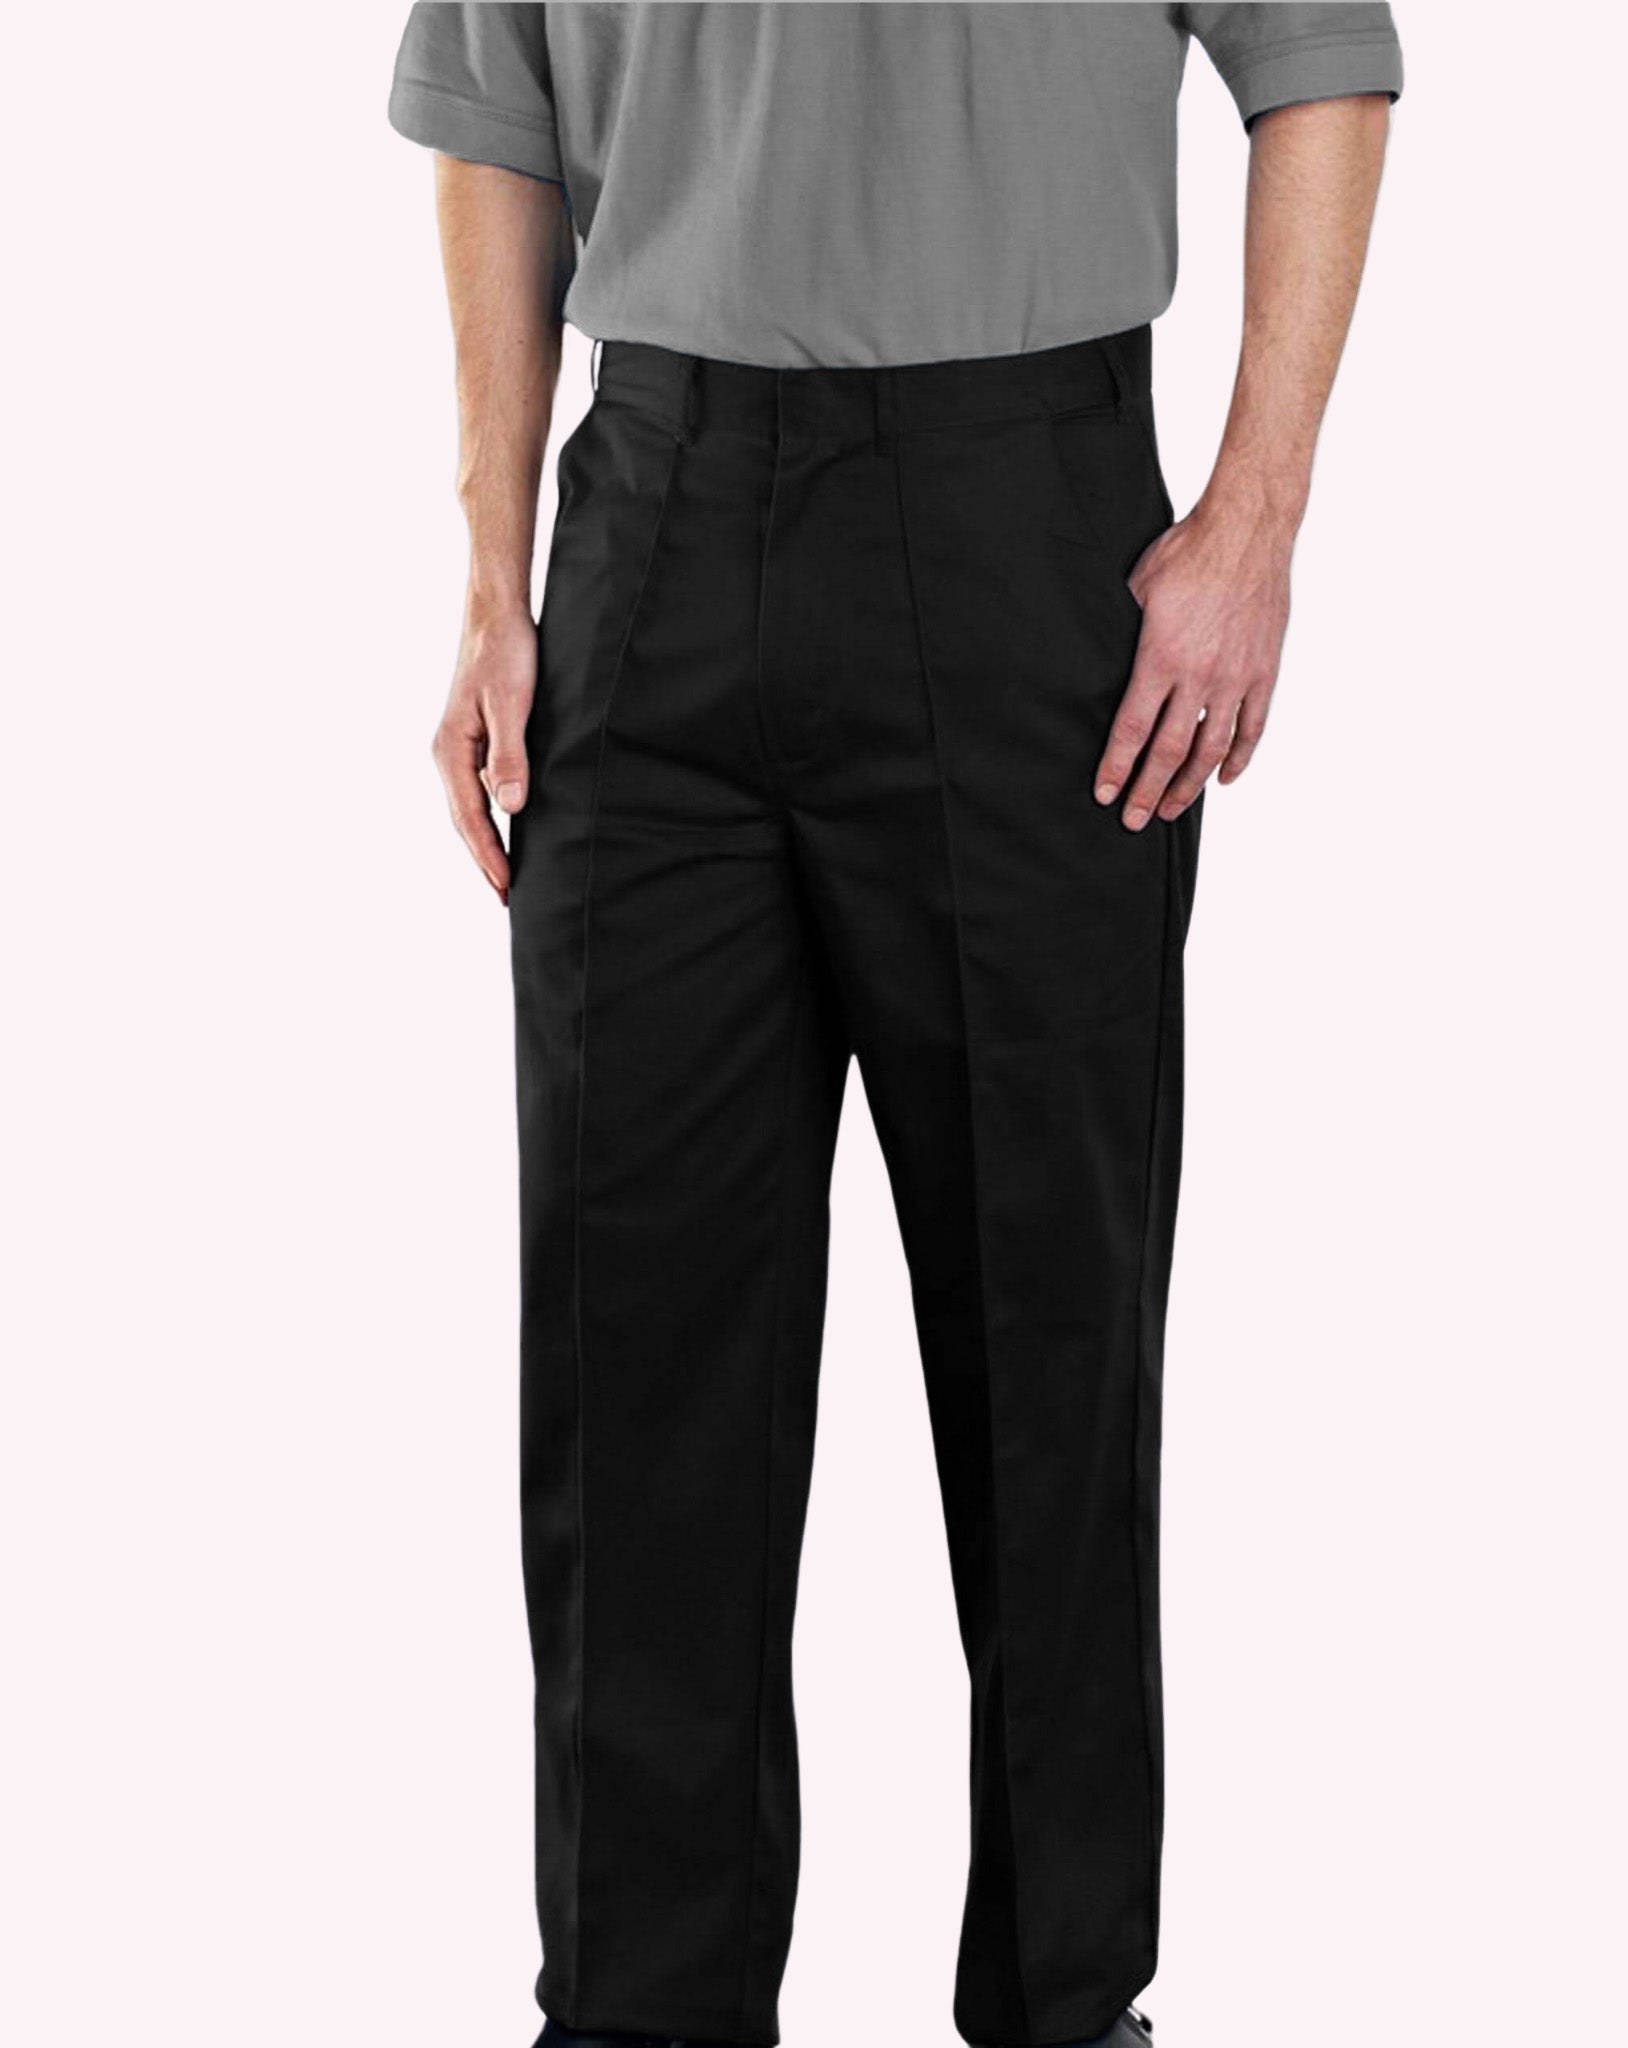 Male Work Trousers – Uniforms4Healthcare